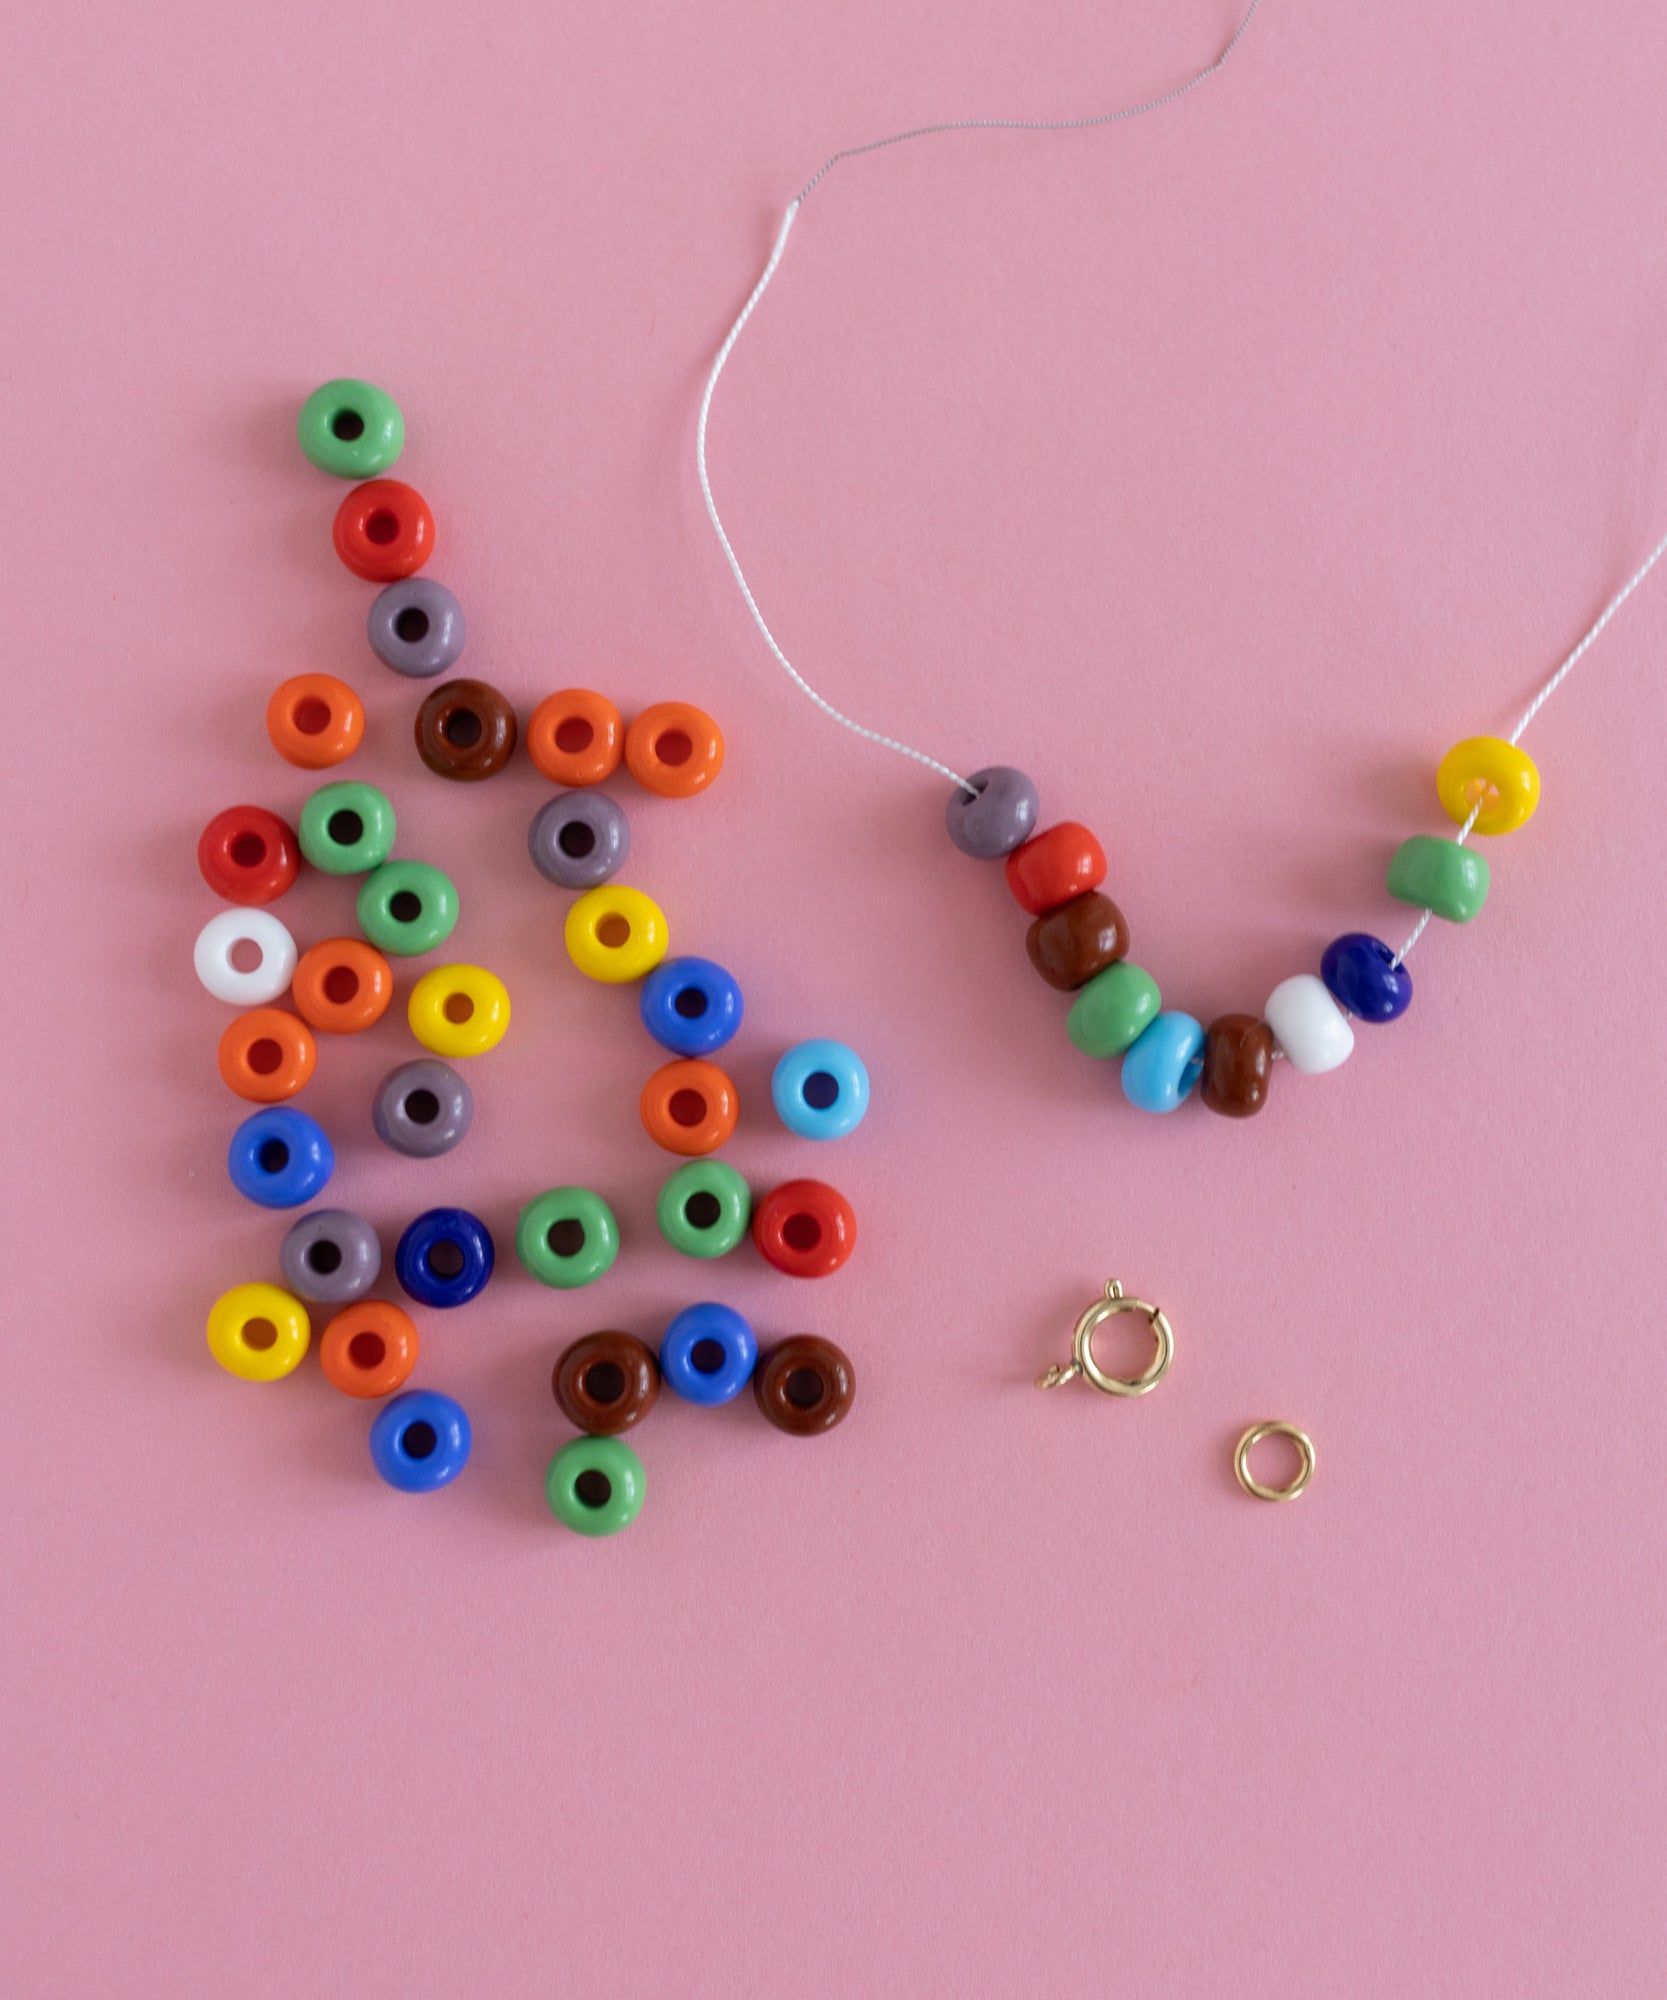 A DIY jewelry kit featuring a necklace and bracelet crafting set with colorful beads and a ring, presented on a pink background by WALD World.